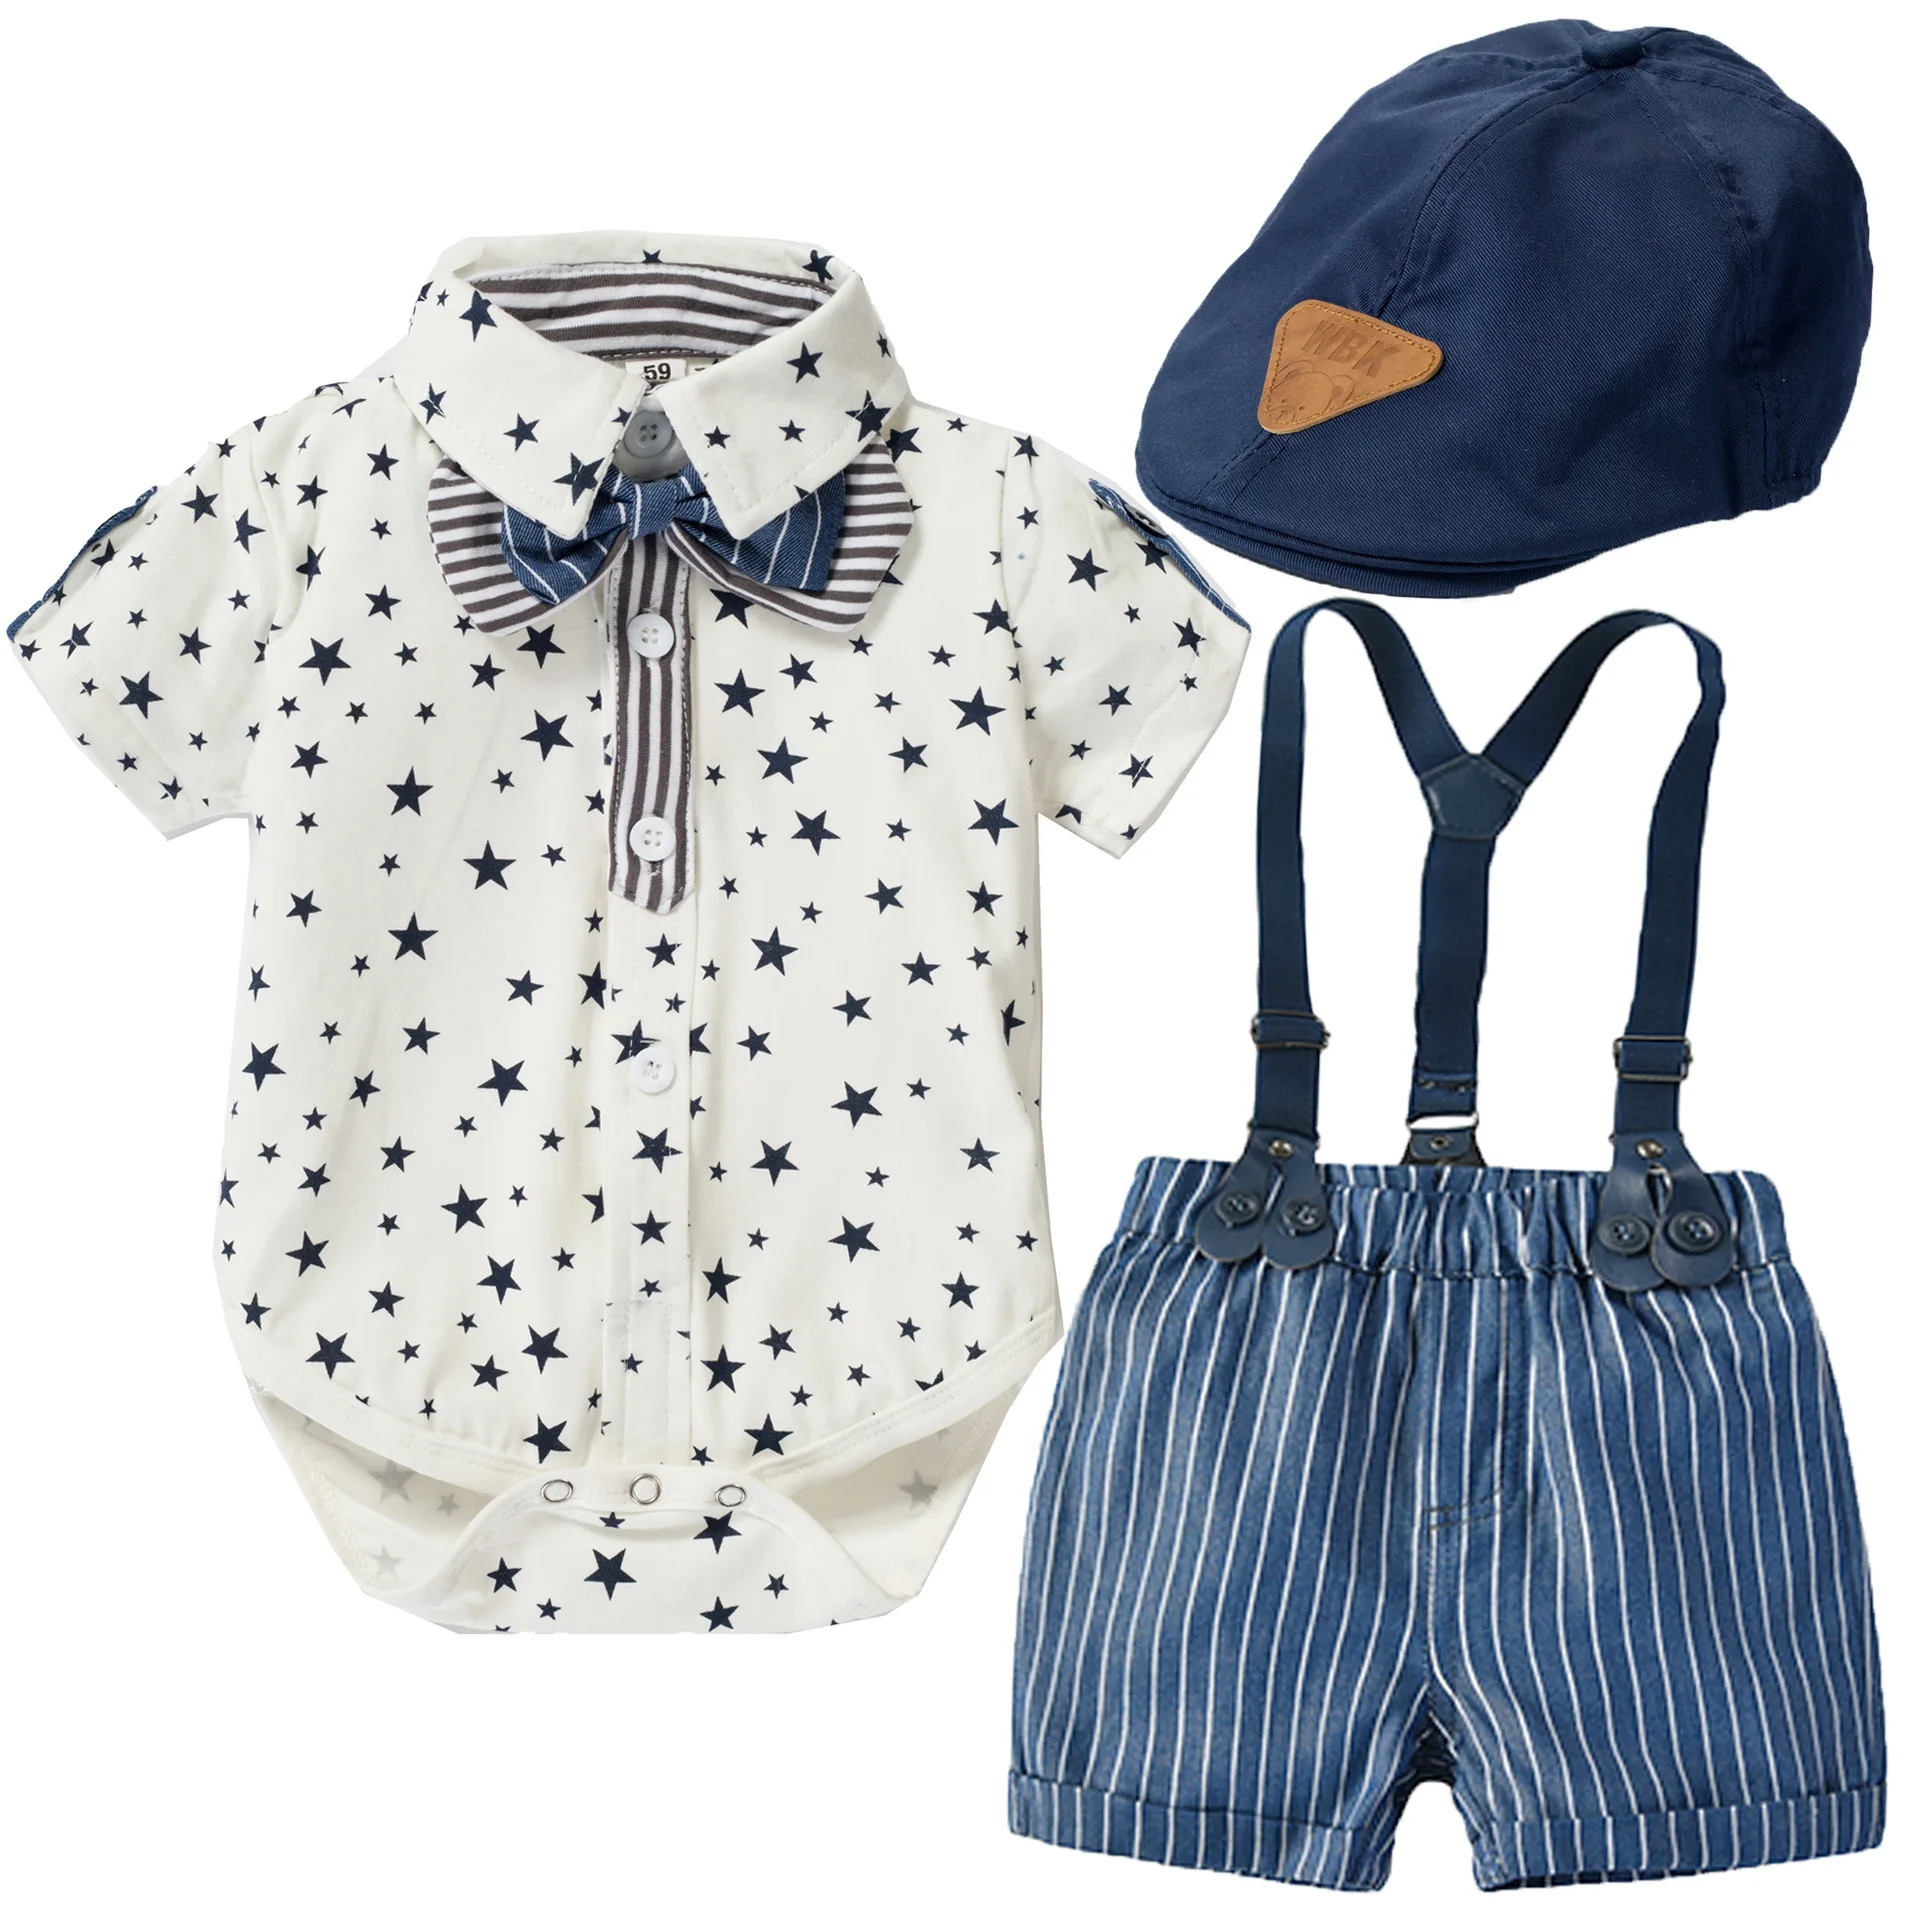 Blue Gentleman Clothes Baby Boy First Birthday Outfit  One-pieces Bodysuits with Tie Boys Shoes Cap for Wedding Photograph